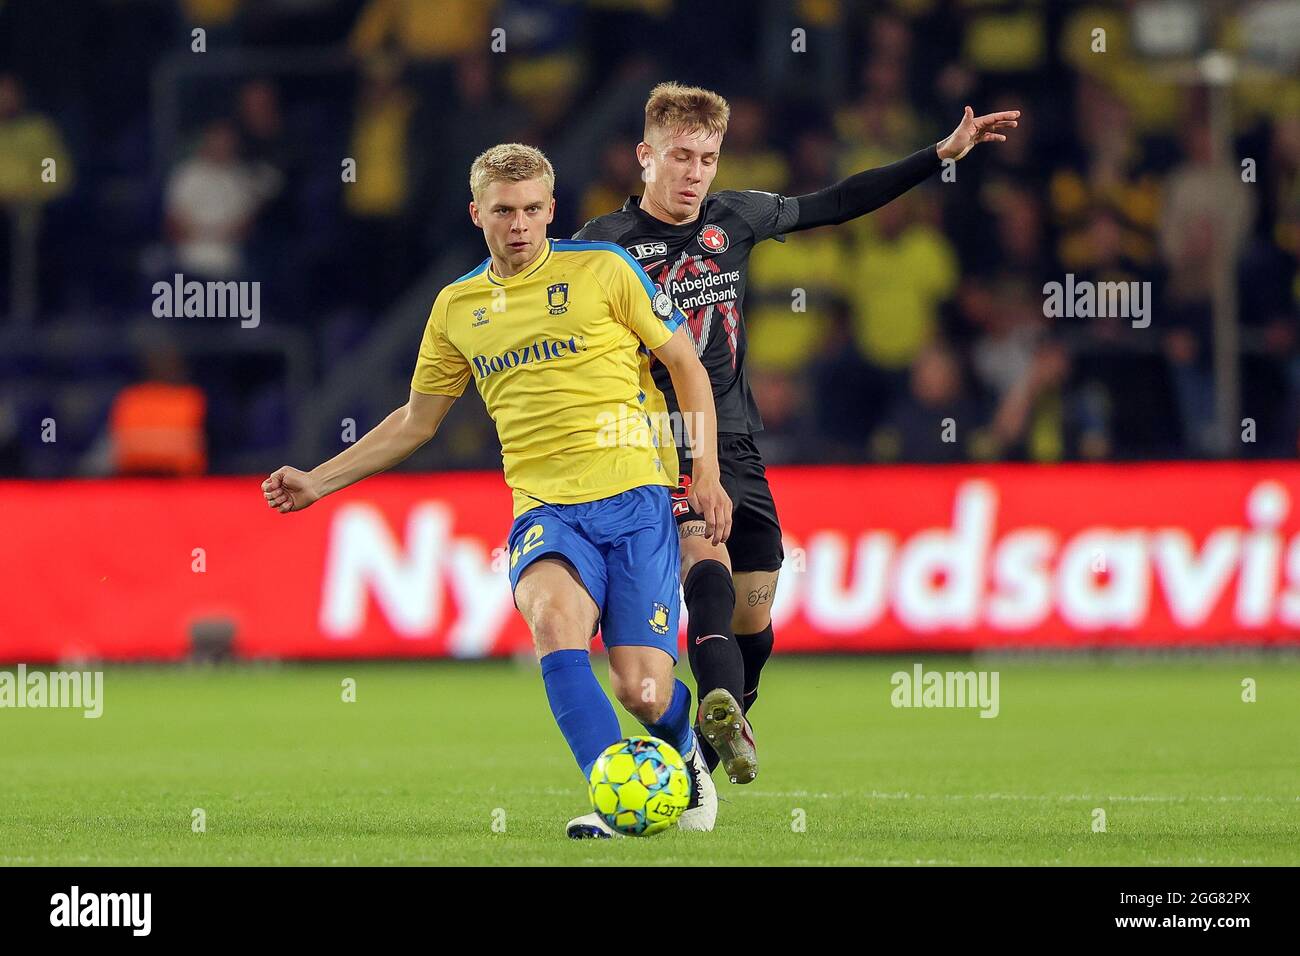 Brondby, Denmark. 29th Aug, 2021. Tobias Borkeeiet (42) of Broendby IF and Charles (35) of FC Midtjylland seen during the 3F Superliga match between Broendby IF and FC Midtjylland at Brondby Stadion. (Photo Credit: Gonzales Photo/Alamy Live News Stock Photo